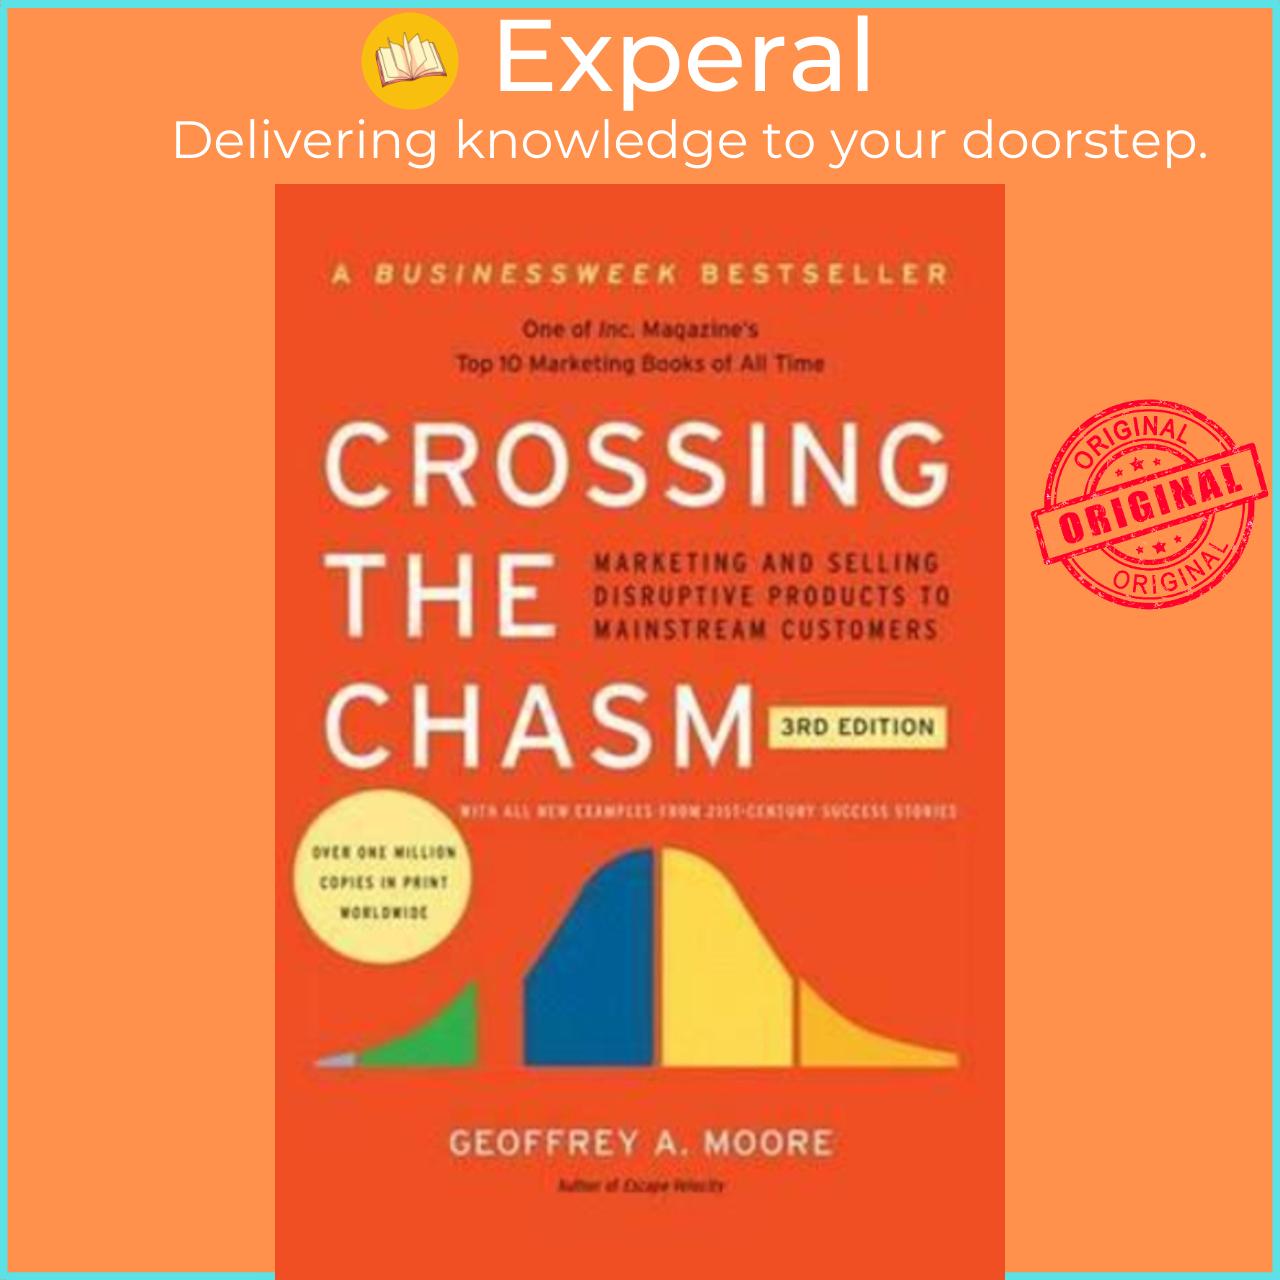 Sách - Crossing the Chasm, 3rd Edition: Marketing and Selling Disruptive Products to Mainstream Customers (Collins Business Essentials) by Geoffrey A. Moore - (US Edition, paperback)